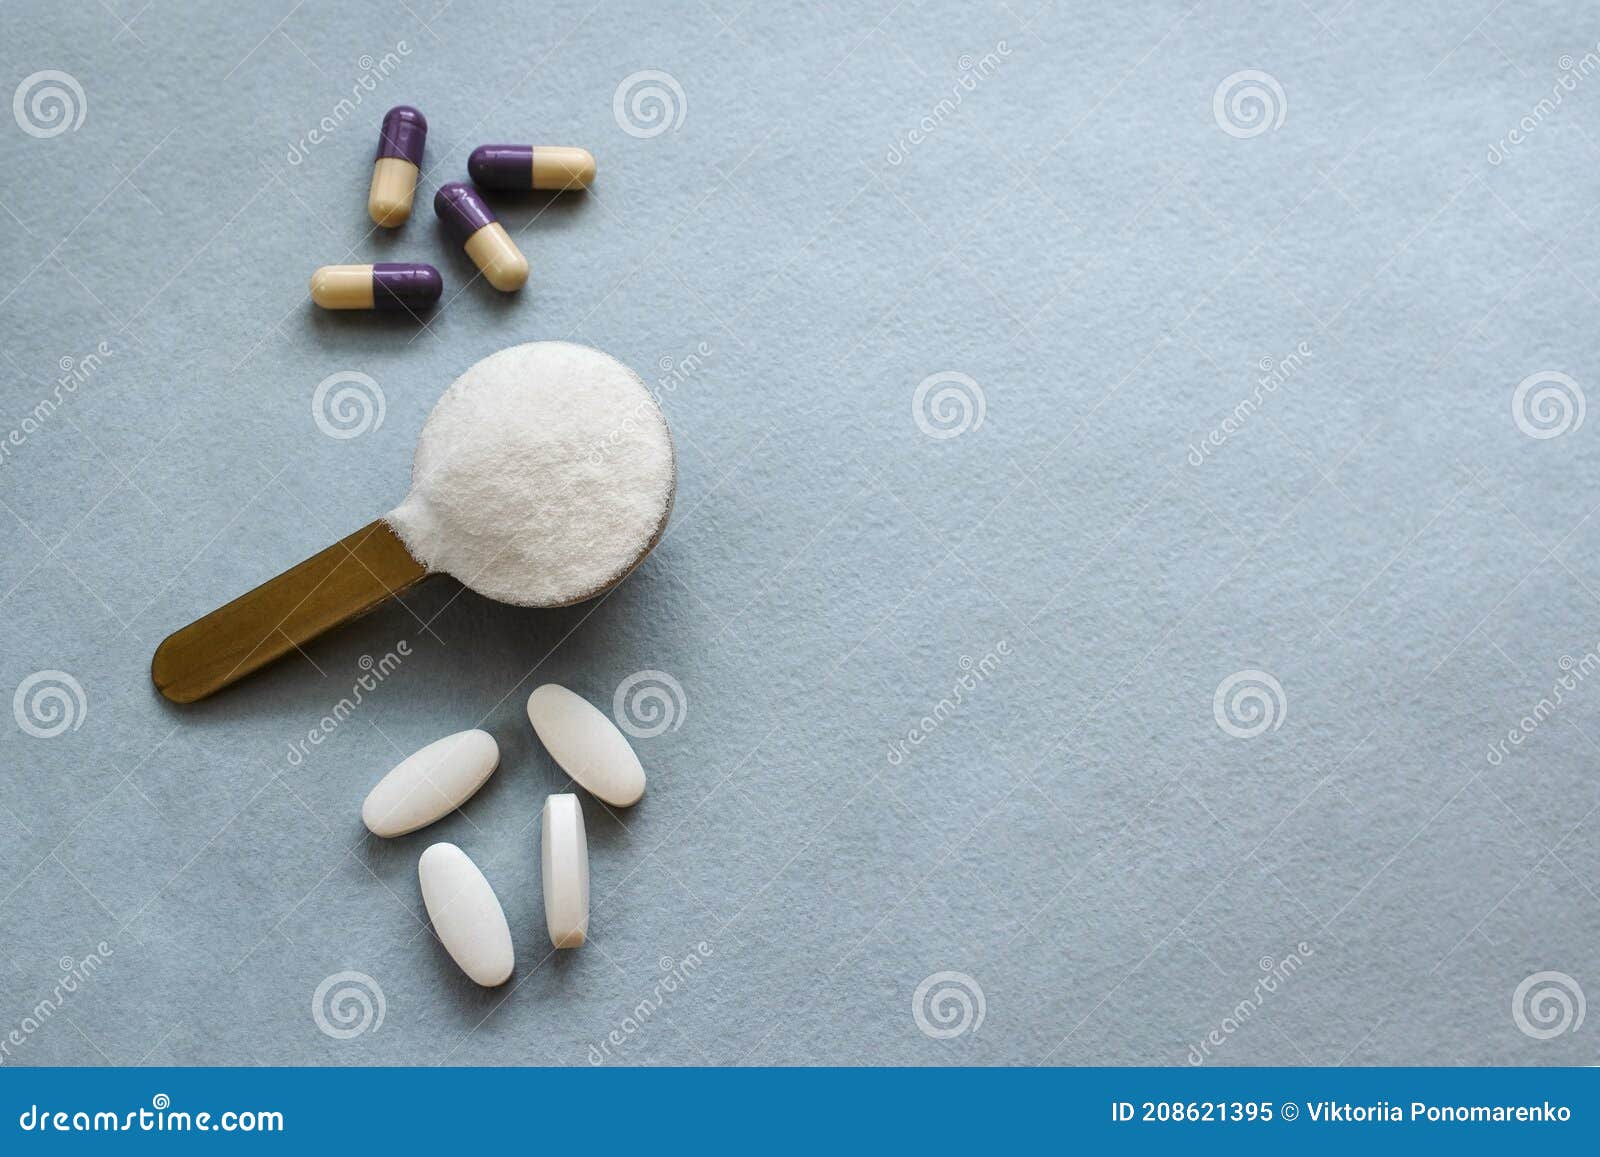 three types of collagen in powder, tablets and capsules on a gray background. measuring spoon with powdered hydrolyzed